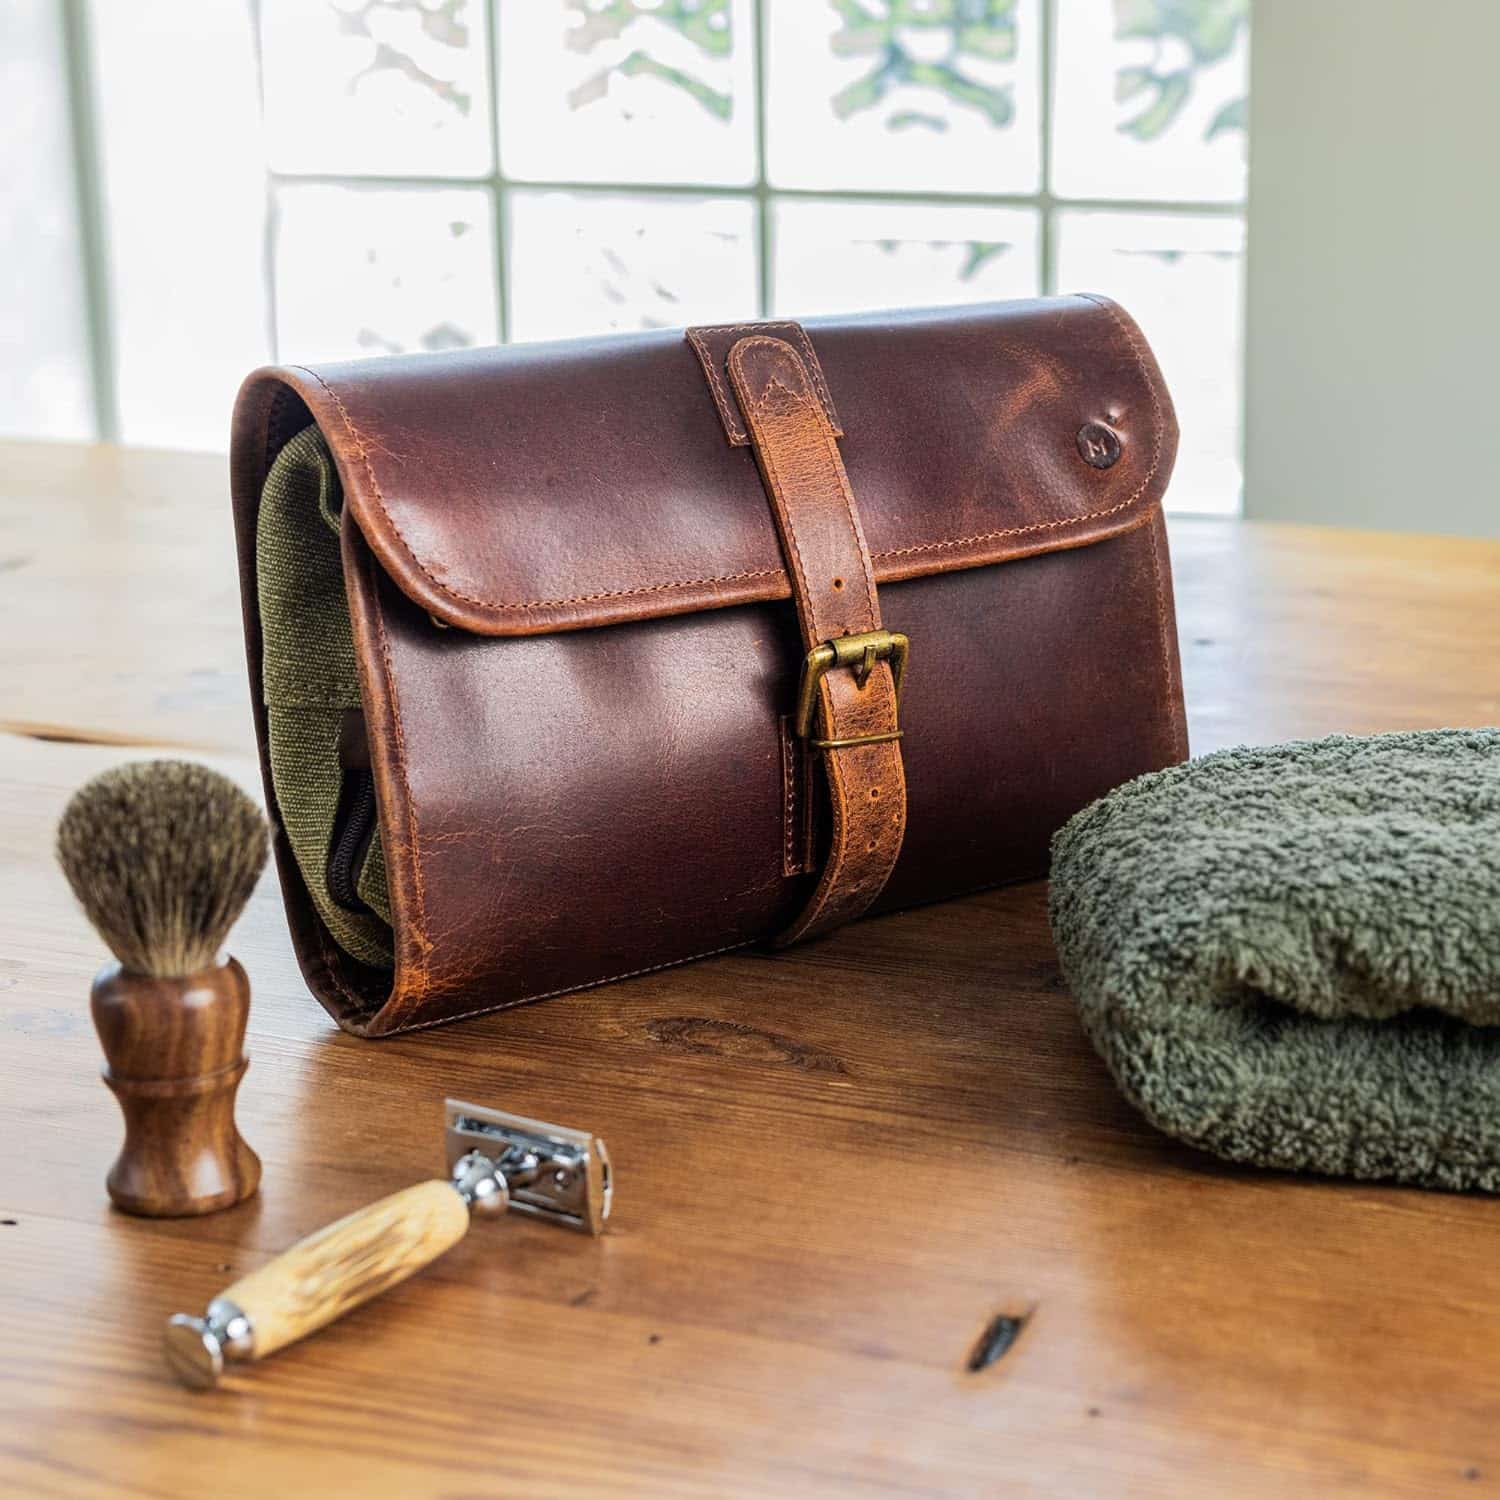 You are currently viewing Top 5 Men’s Toiletry Leather Bags: Expert Review and Buyer’s Guide for Amazon Shoppers